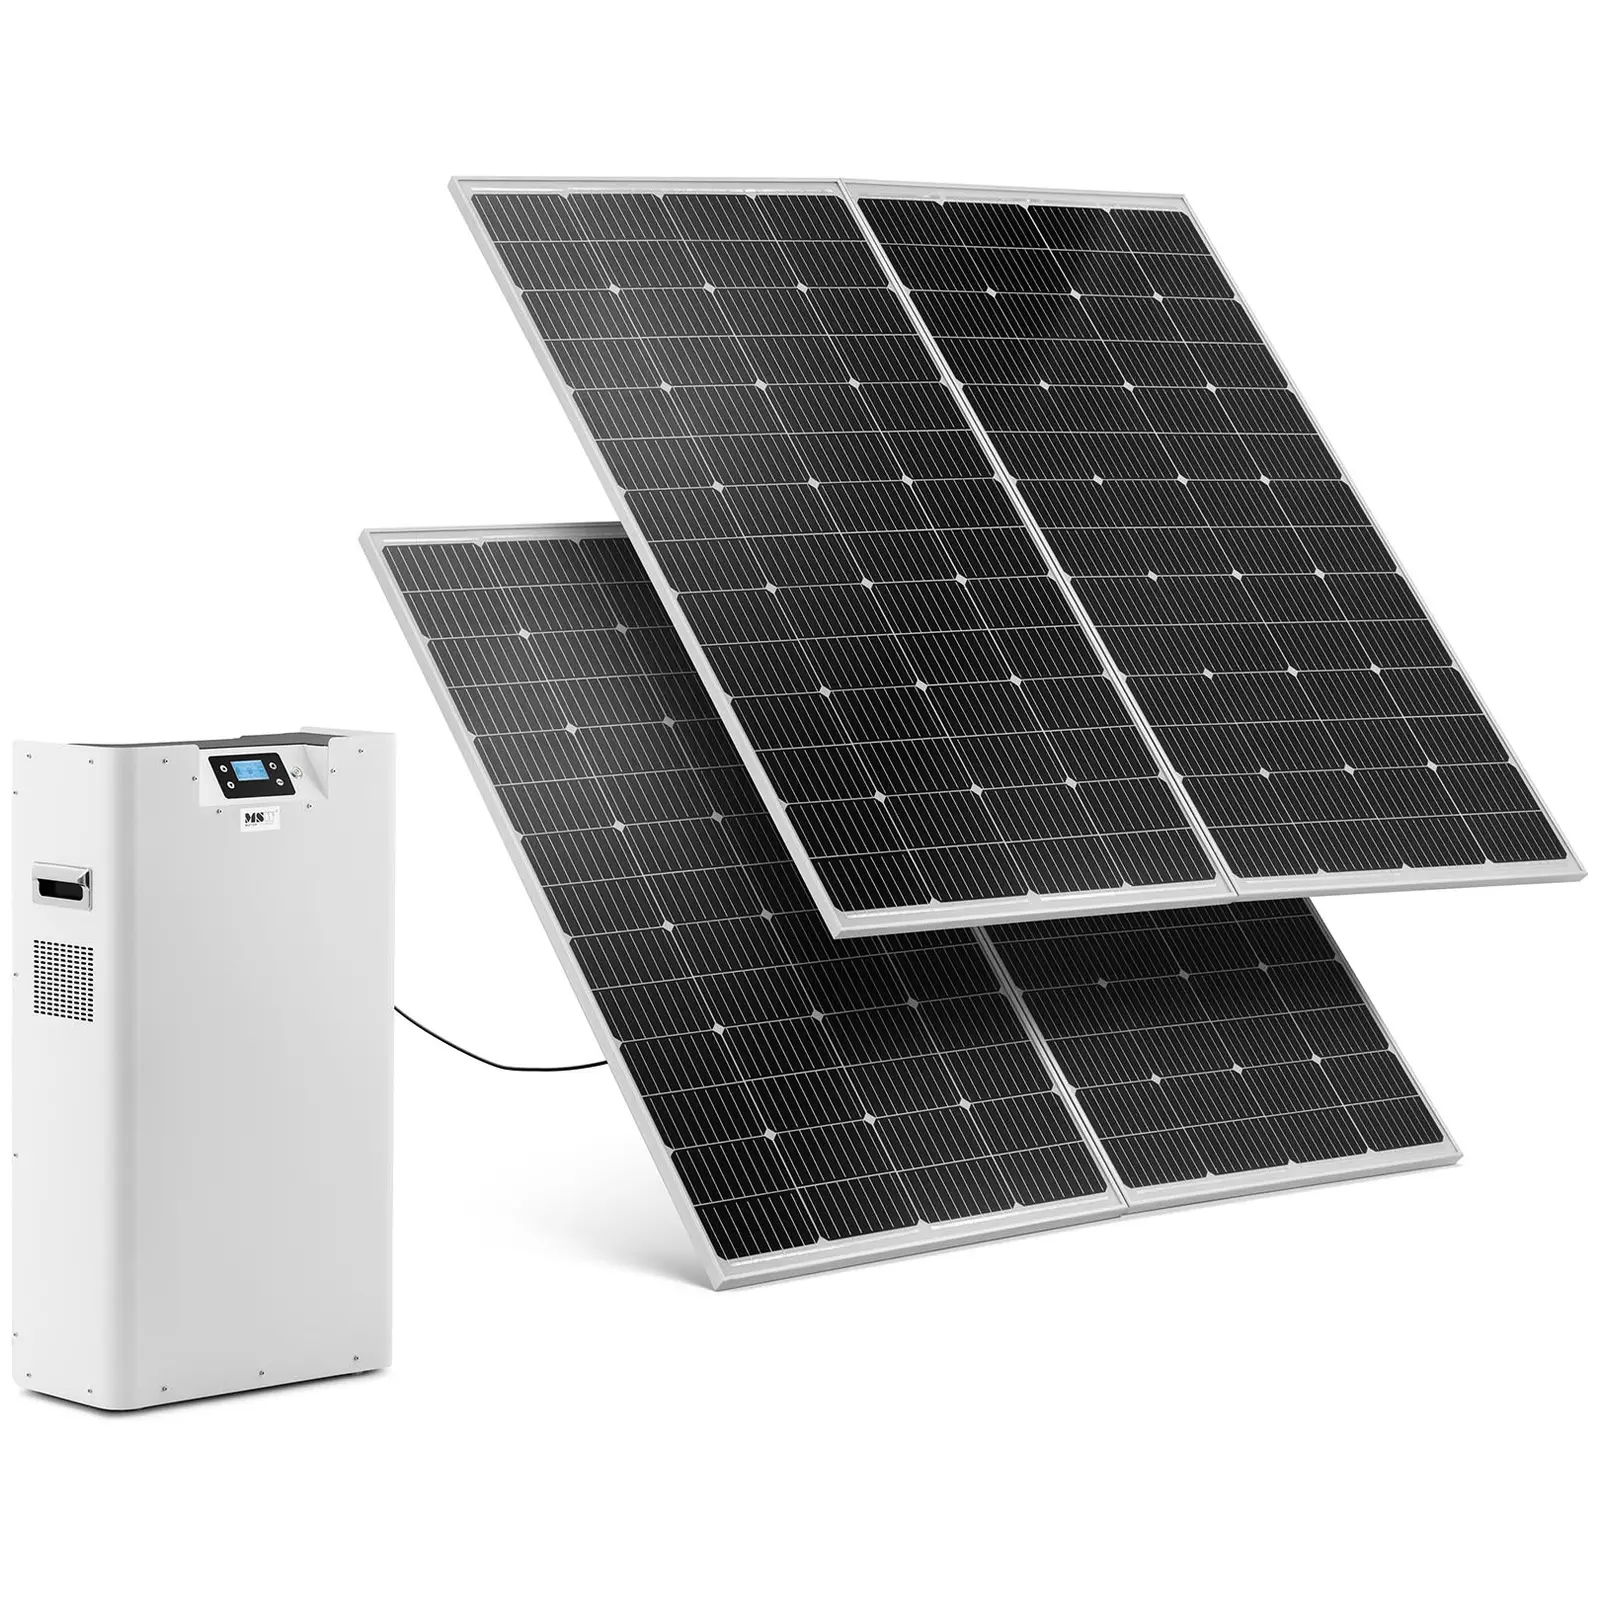 Solar Panel Kit with 2 solar panels and an inverter - 3000 W - 230 V